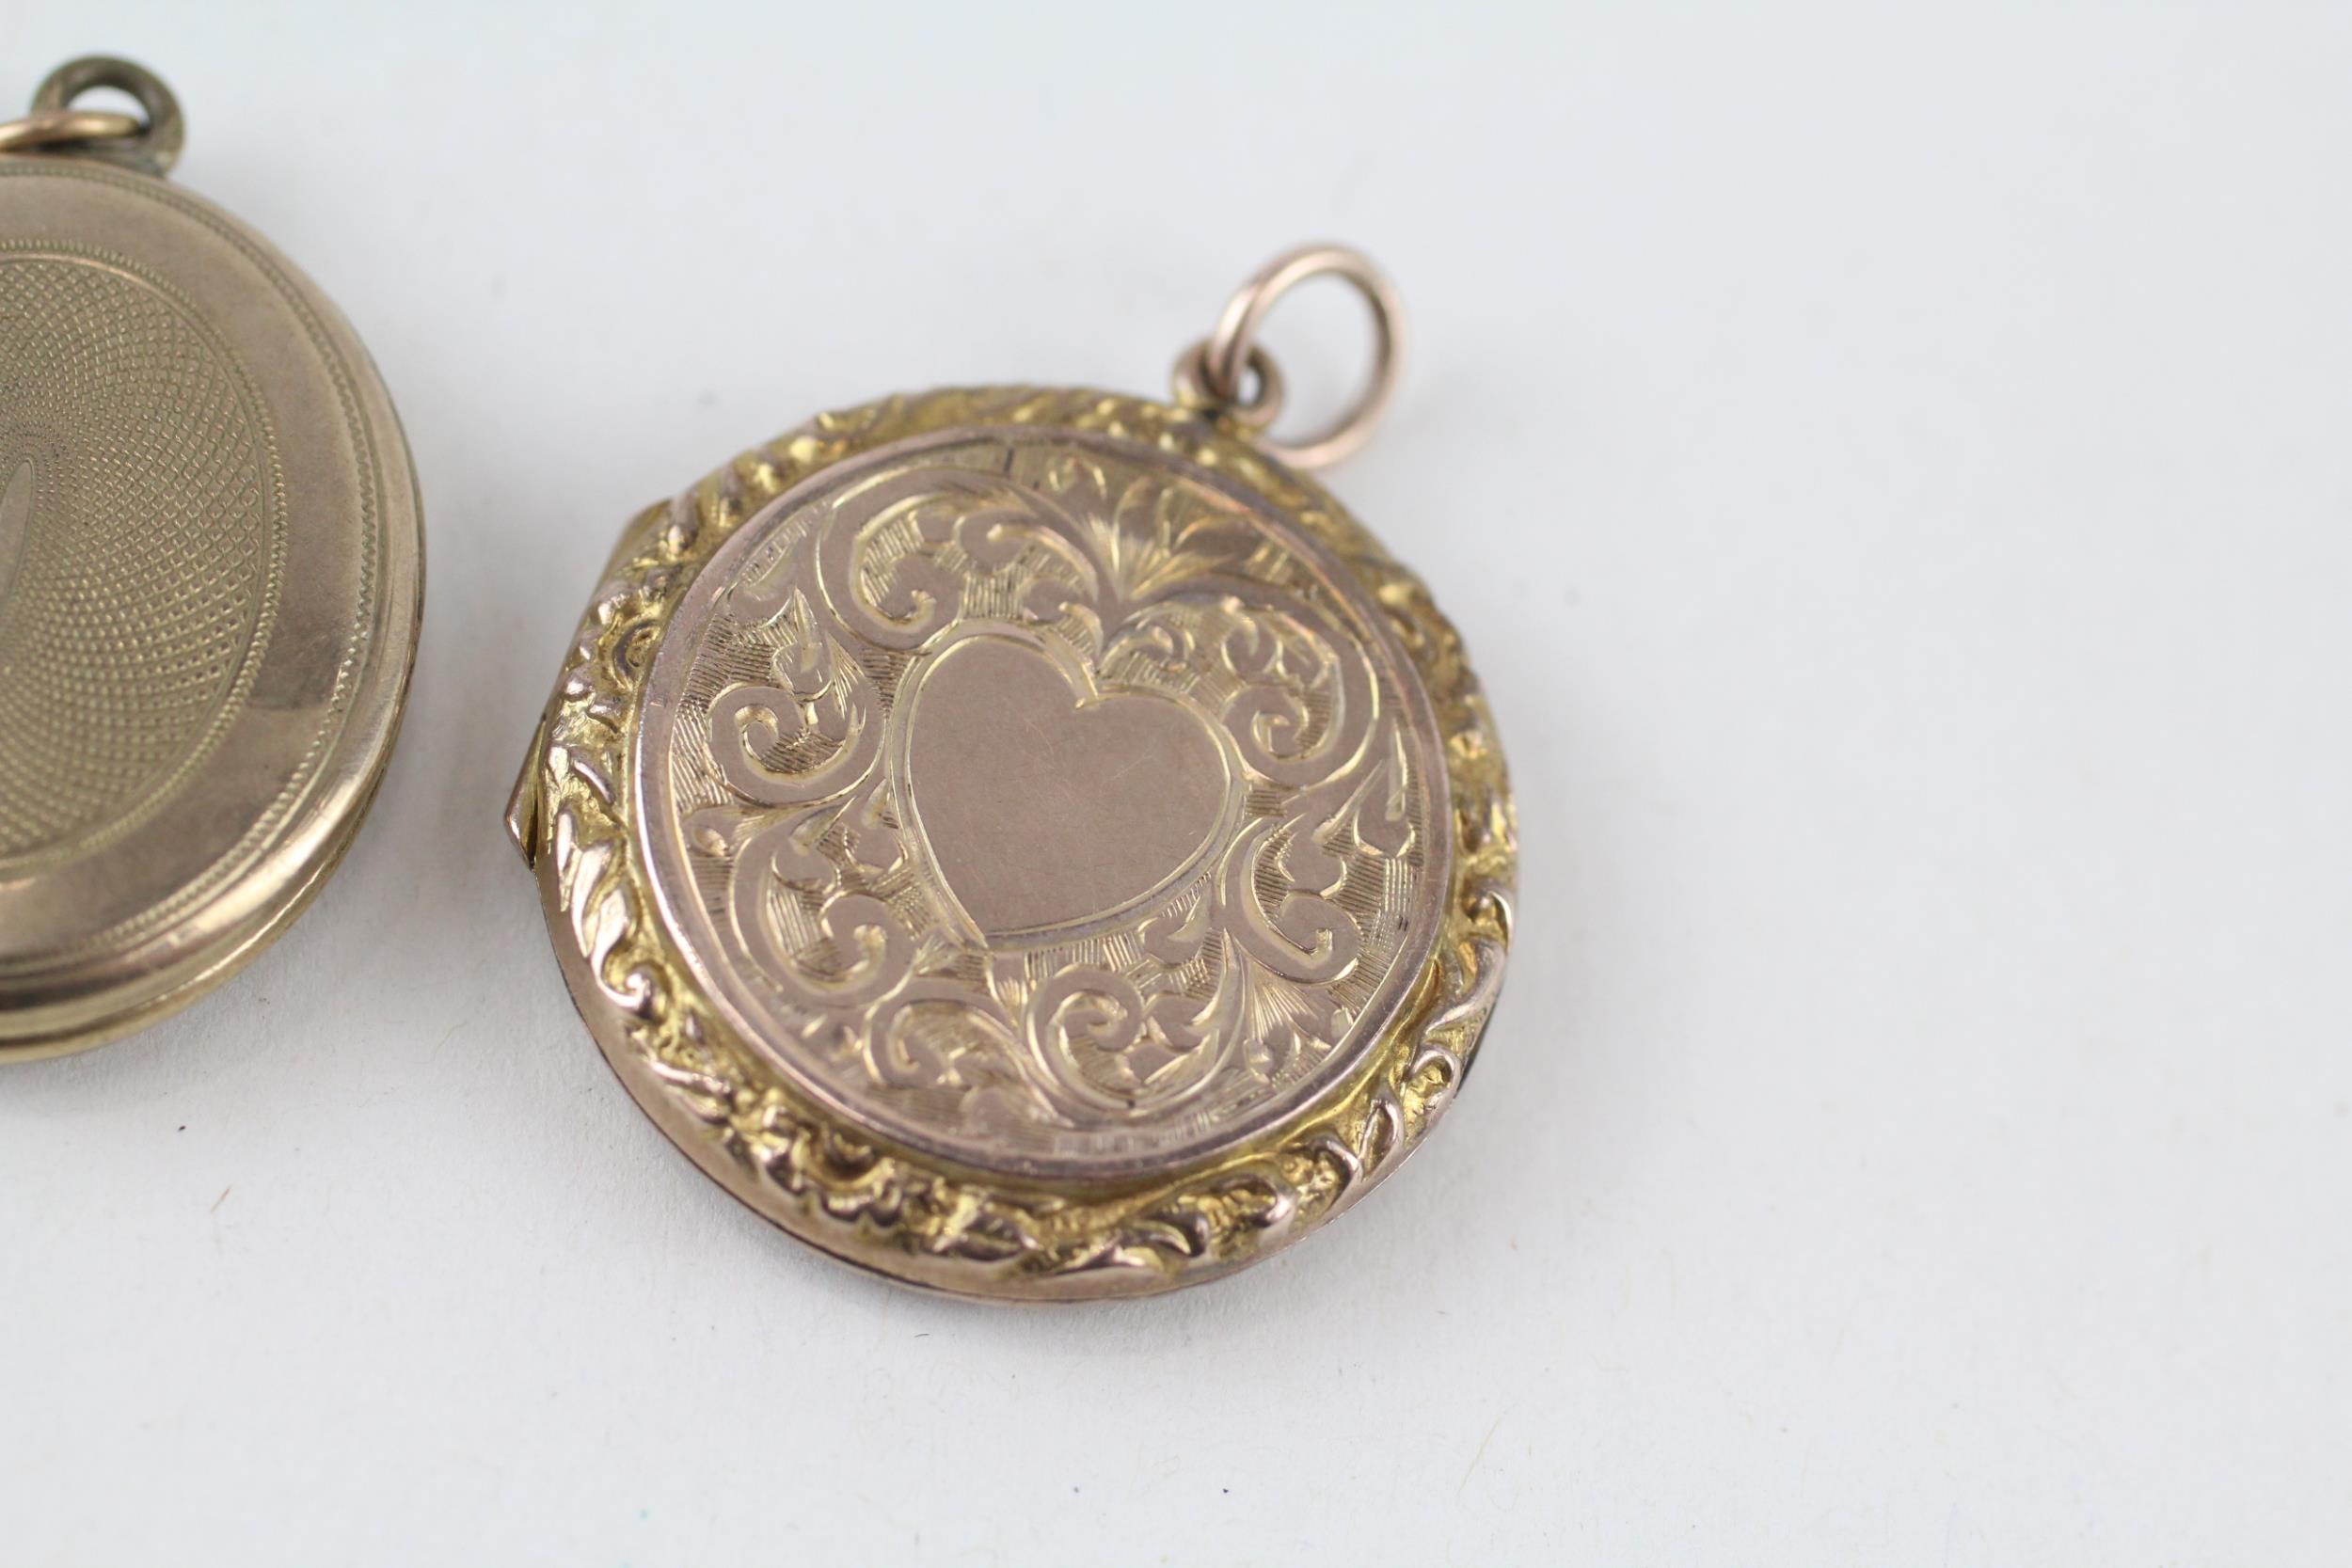 3x 9ct gold back & front antique patterned lockets (13.9g) - Image 2 of 4